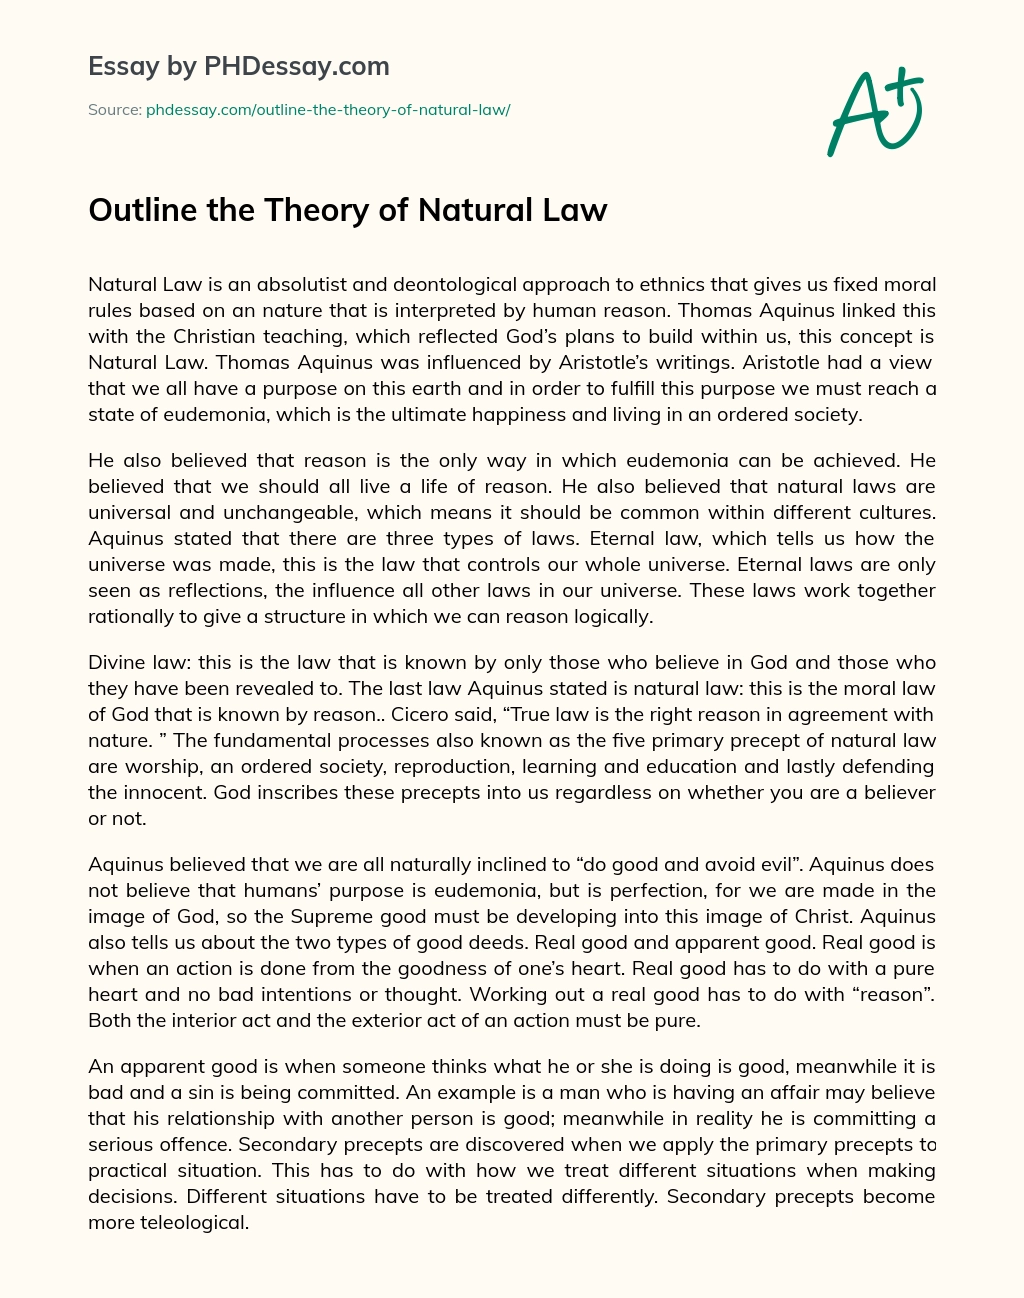 Outline the Theory of Natural Law essay